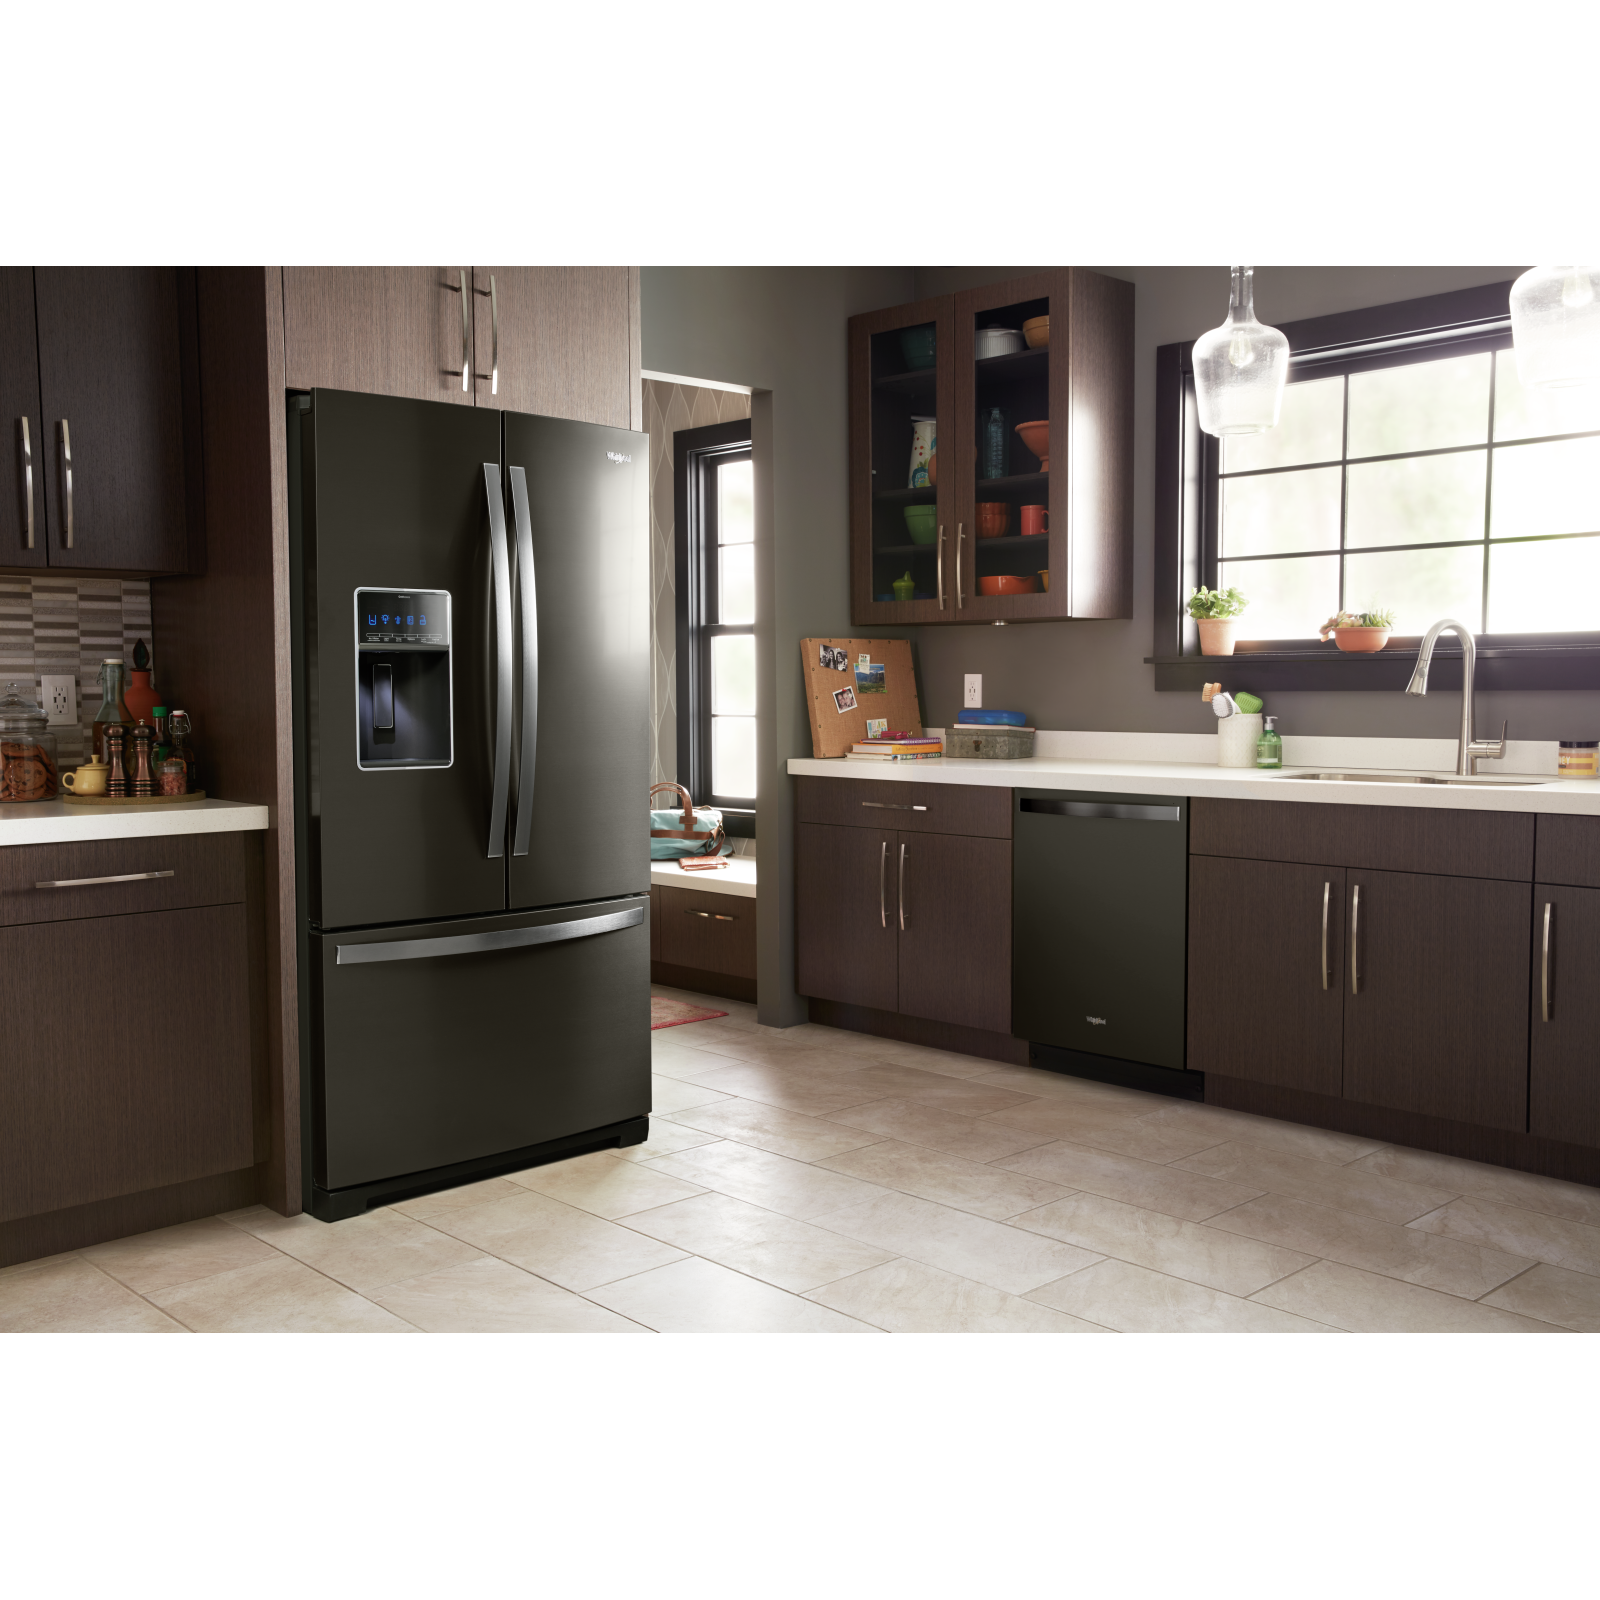 Whirlpool - 35.69 Inch 27 cu. ft French Door Refrigerator in Black Stainless - WRF767SDHV